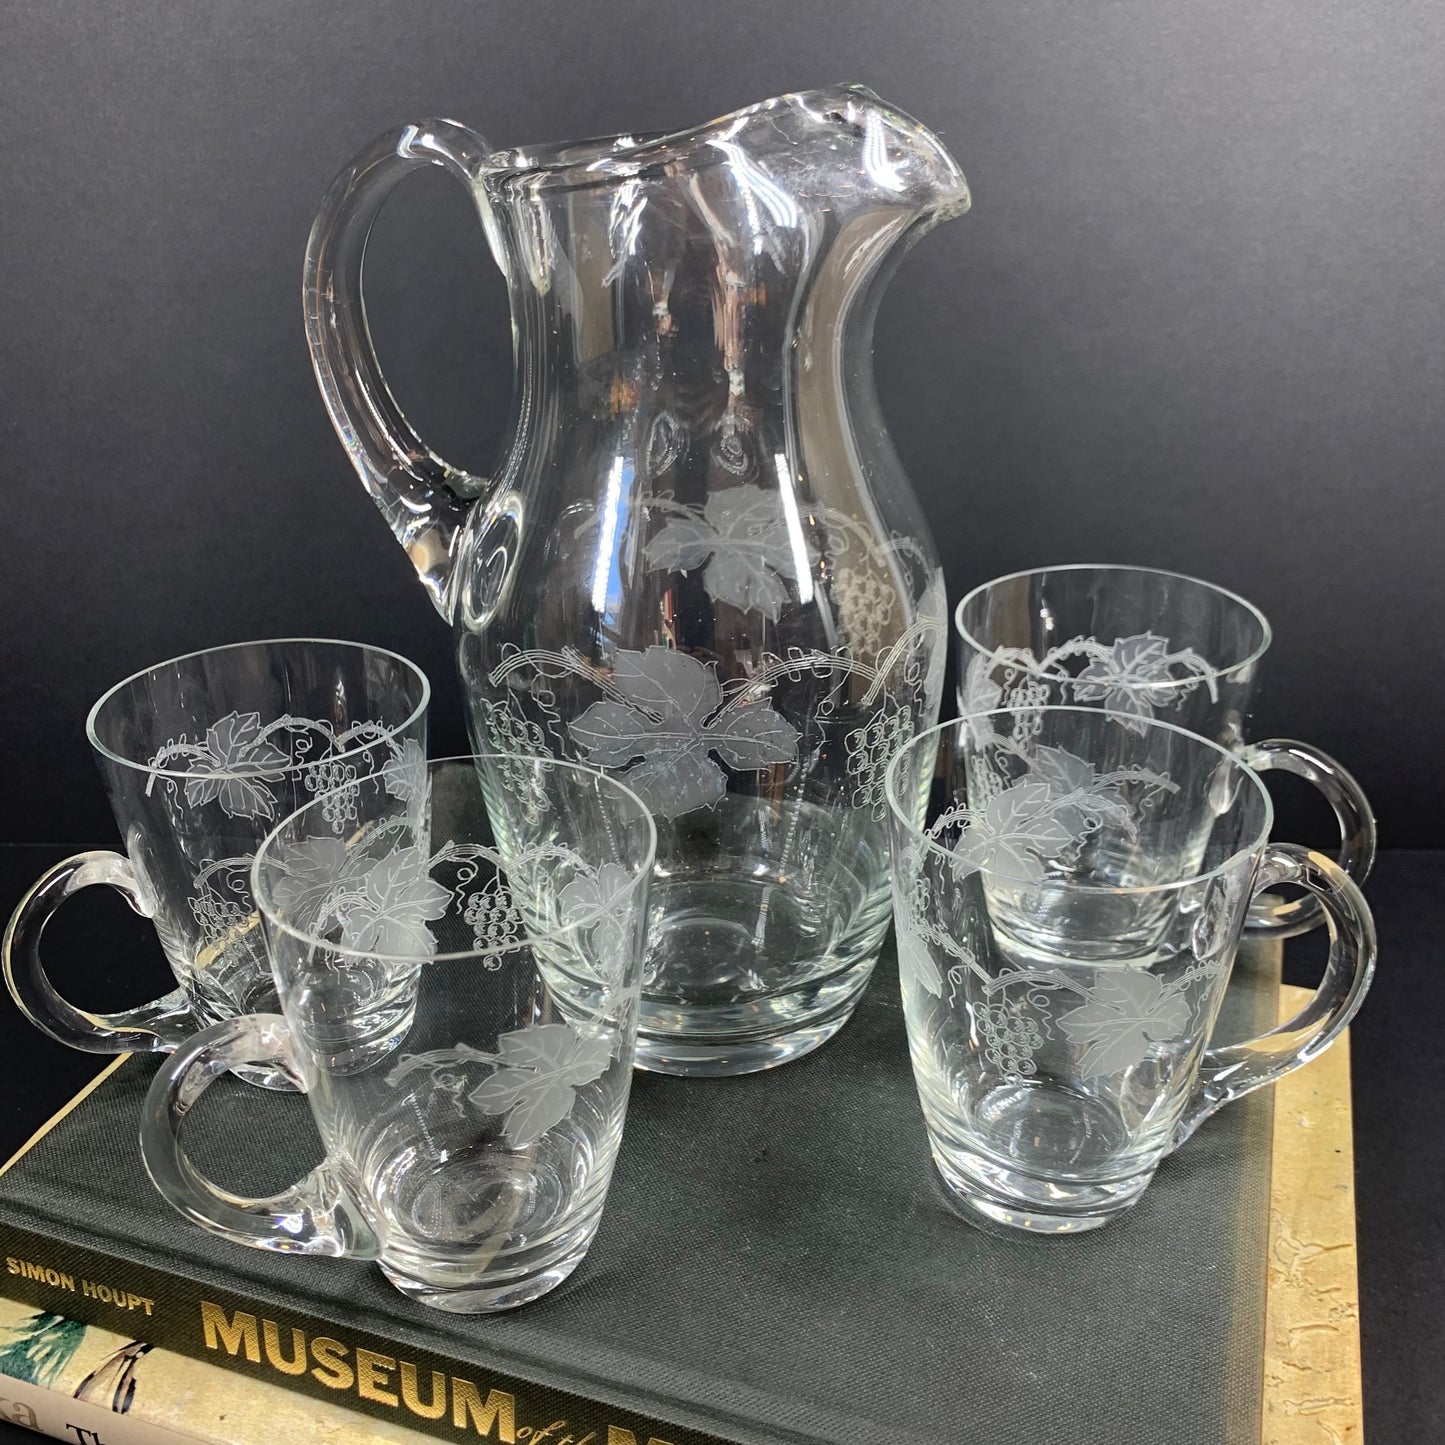 Rare 1940s hand etched glass jug and matching mugs